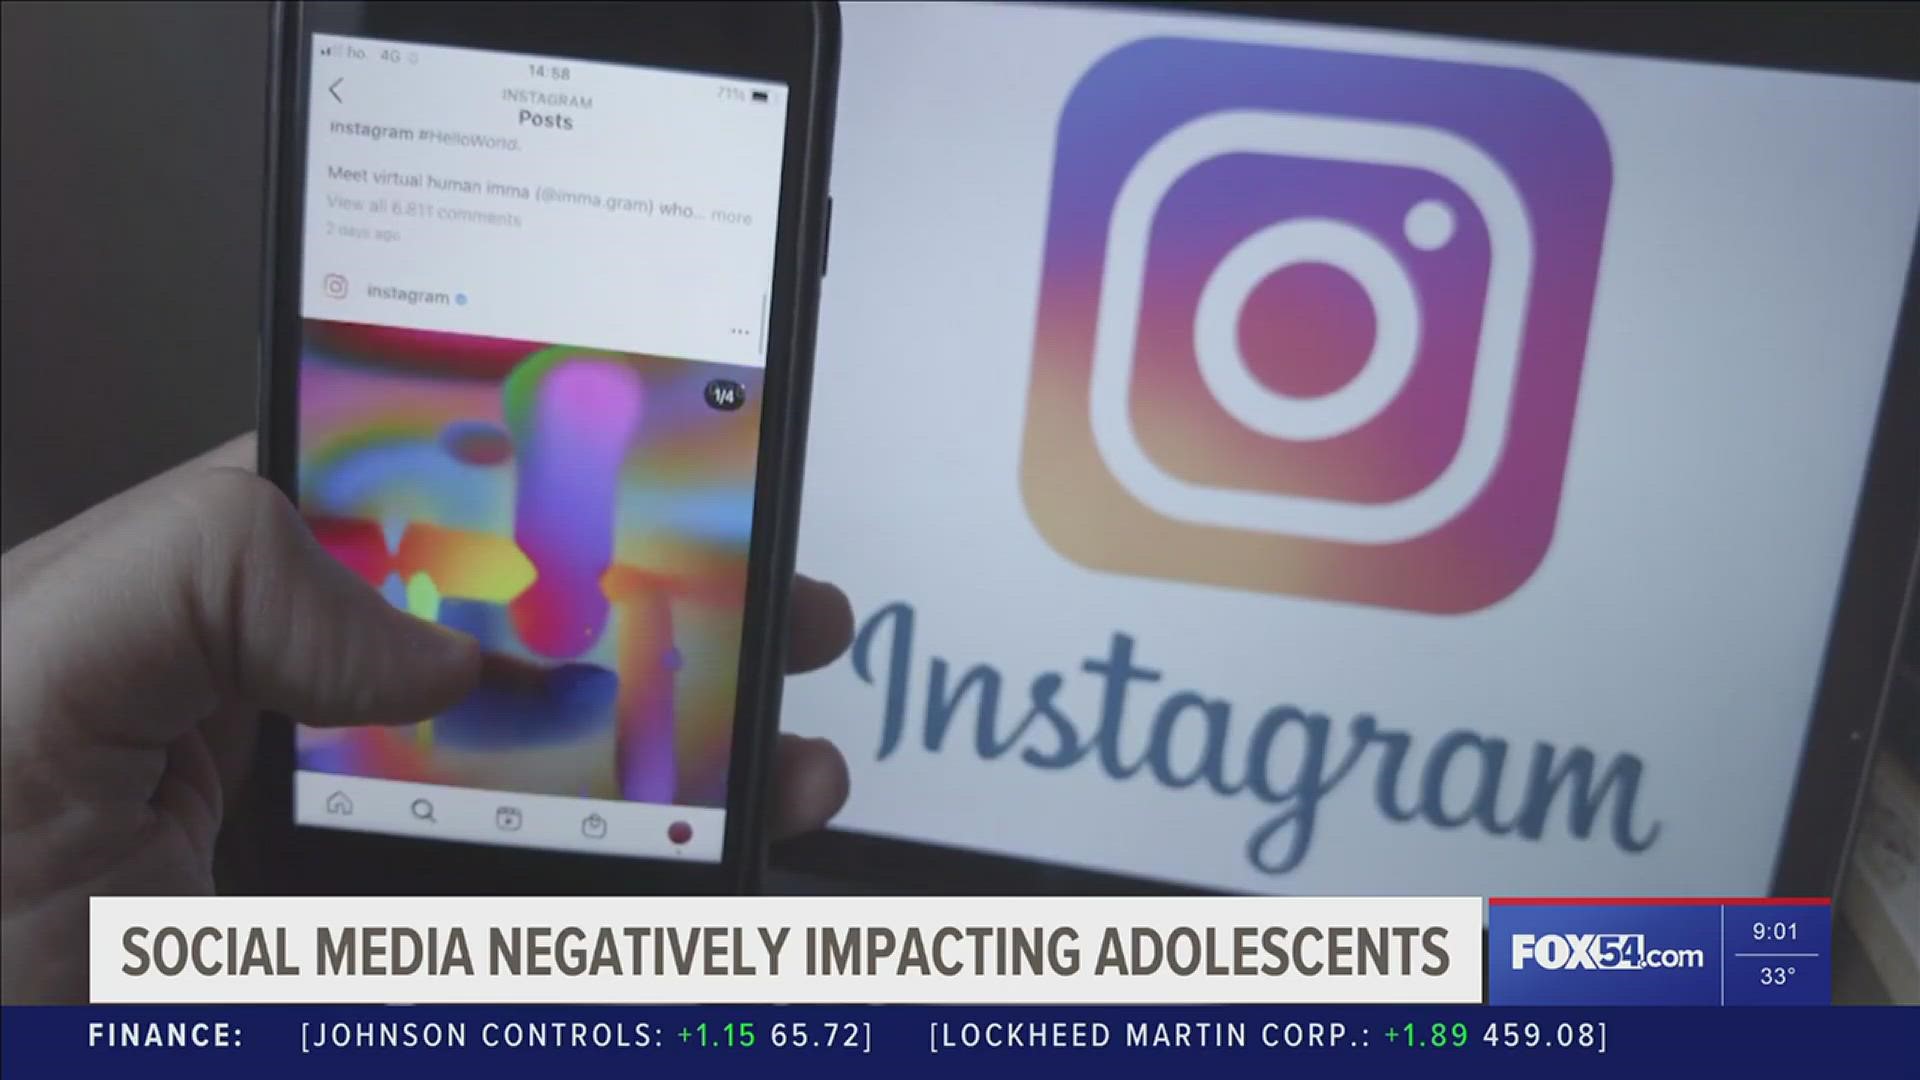 The Surgeon General says that kids under 13 should not be on social media. Hear what Huntsville psychotherapist Monretta Vega has to say, and what tips she has.